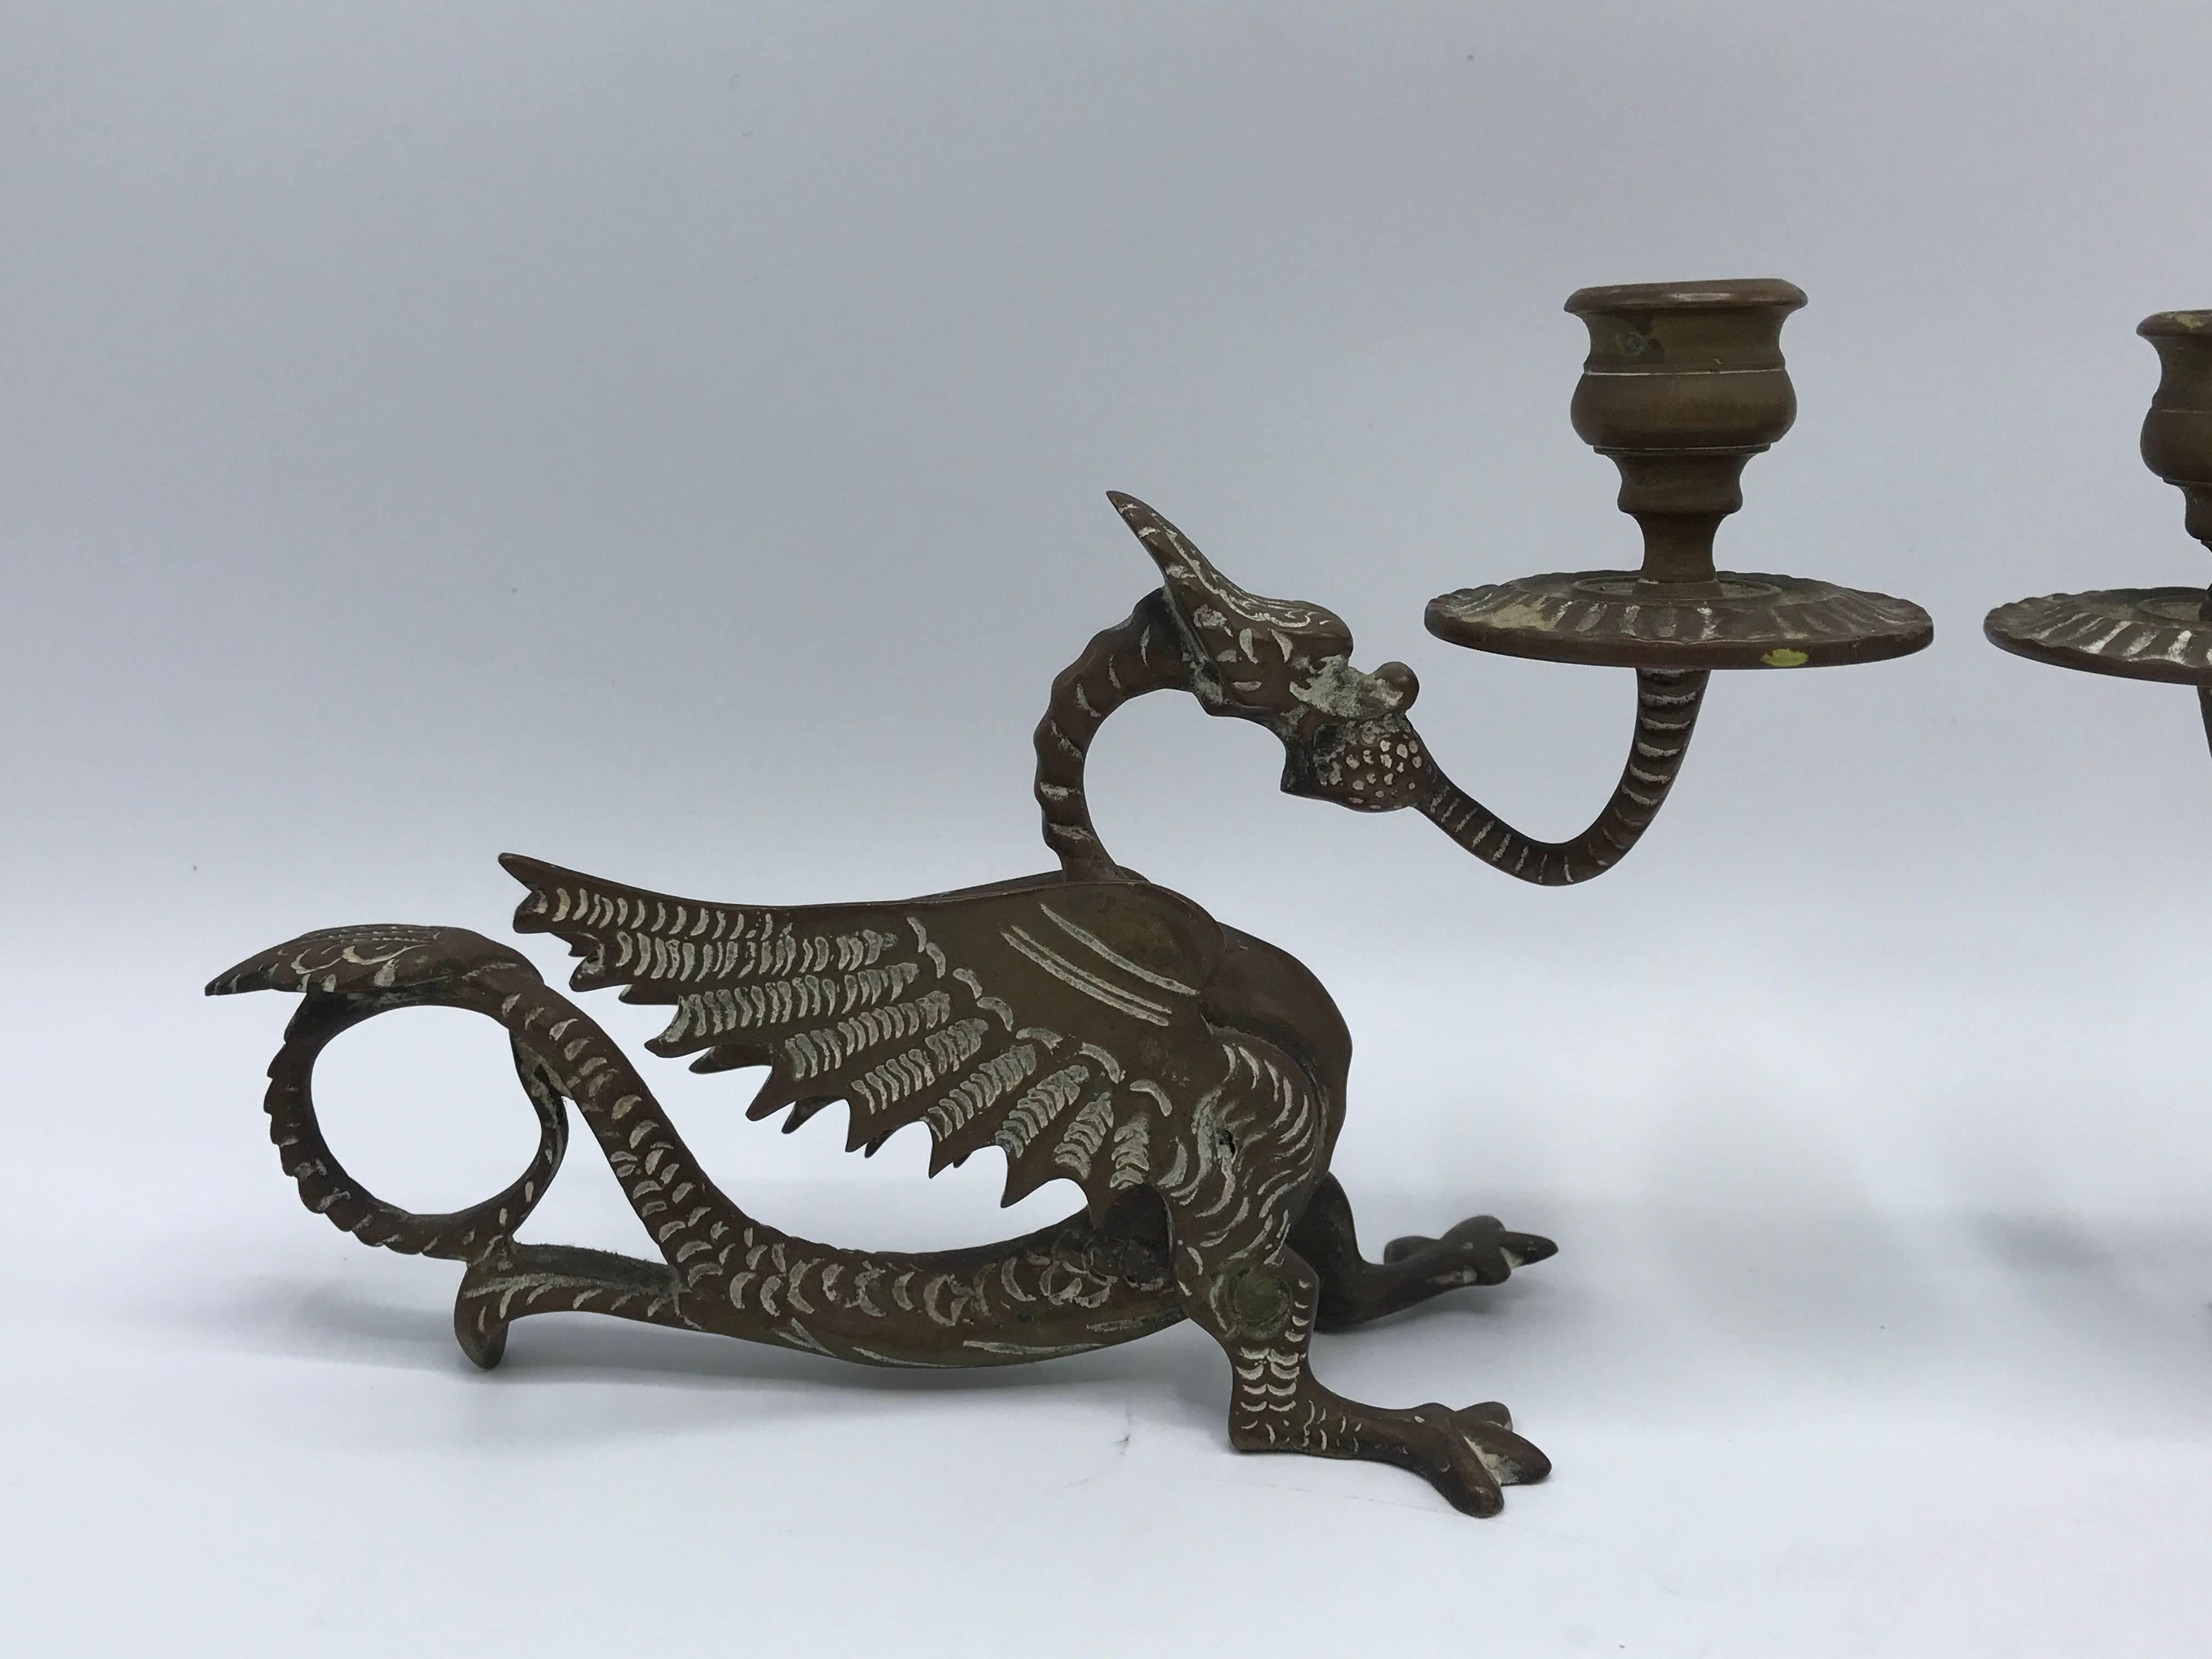 Offered is a stunning, pair of late 19th century solid-bronze dragon foo dog candlestick holders.